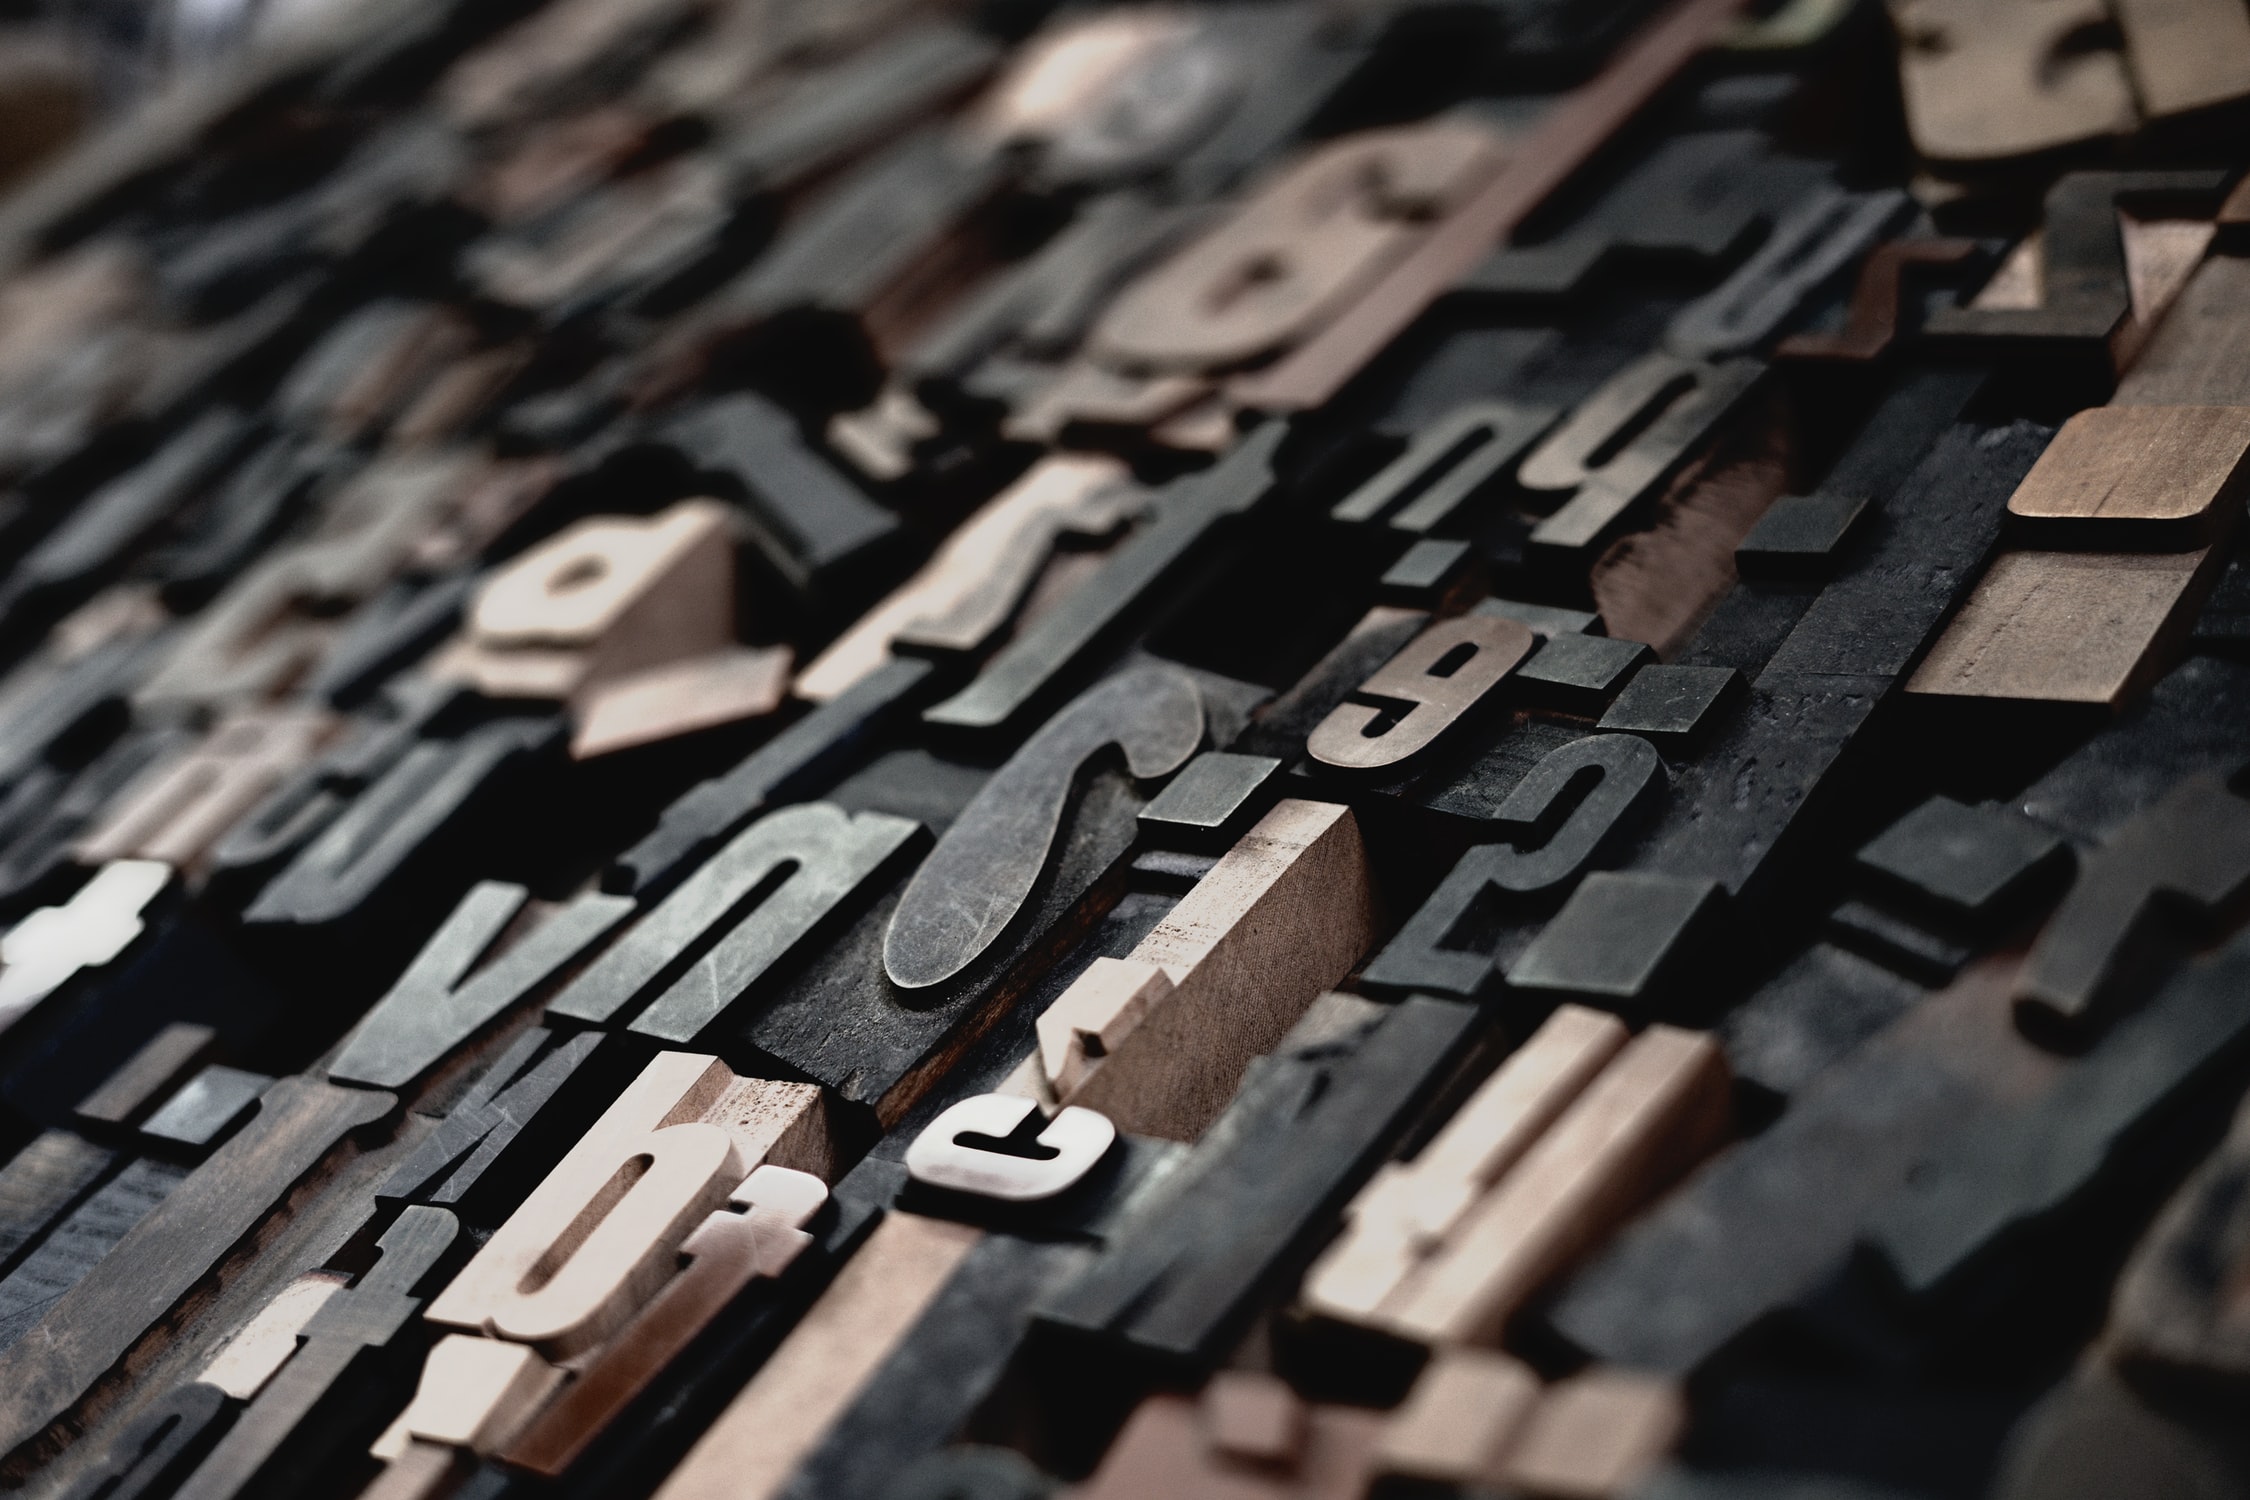 Image shows a jumble of printing blocks with letters on them